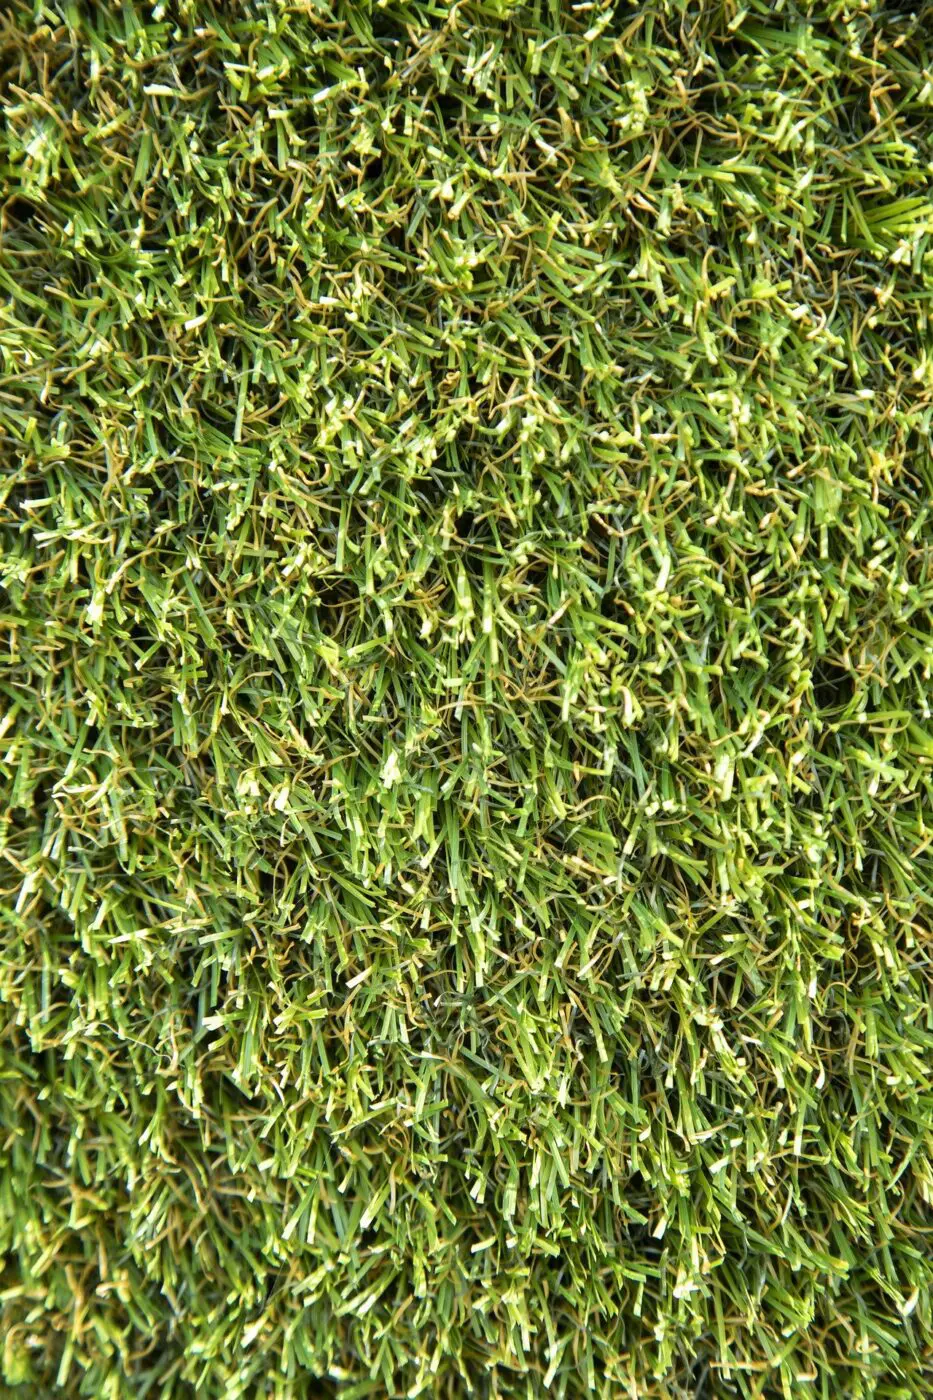 Close-up image of dense, green artificial grass with finely cut blades, creating a lush and uniform appearance. Ideal for pet turf applications, the texture of this synthetic grass resembles a well-maintained natural lawn and offers the convenience of waterless lawns.